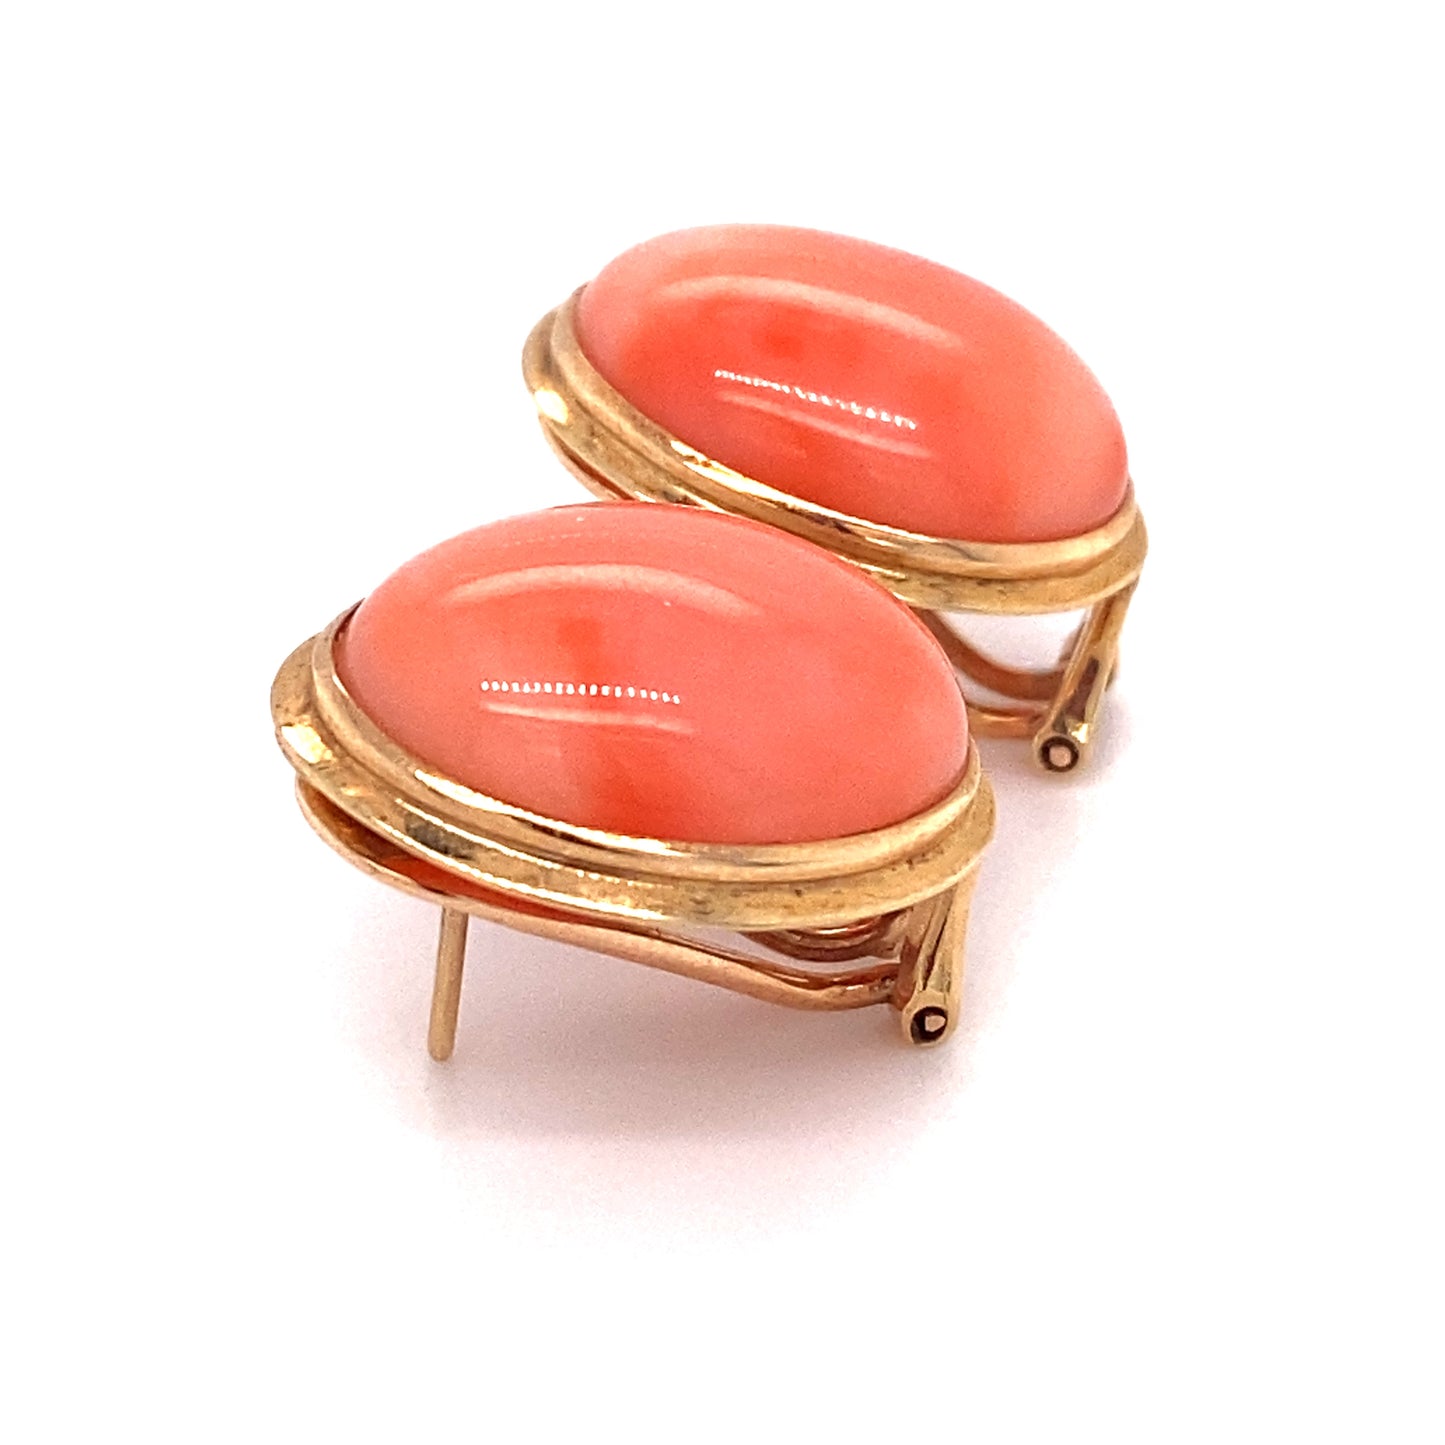 Circa 1920s Oval Orange Coral Button Earrings in 14K Gold